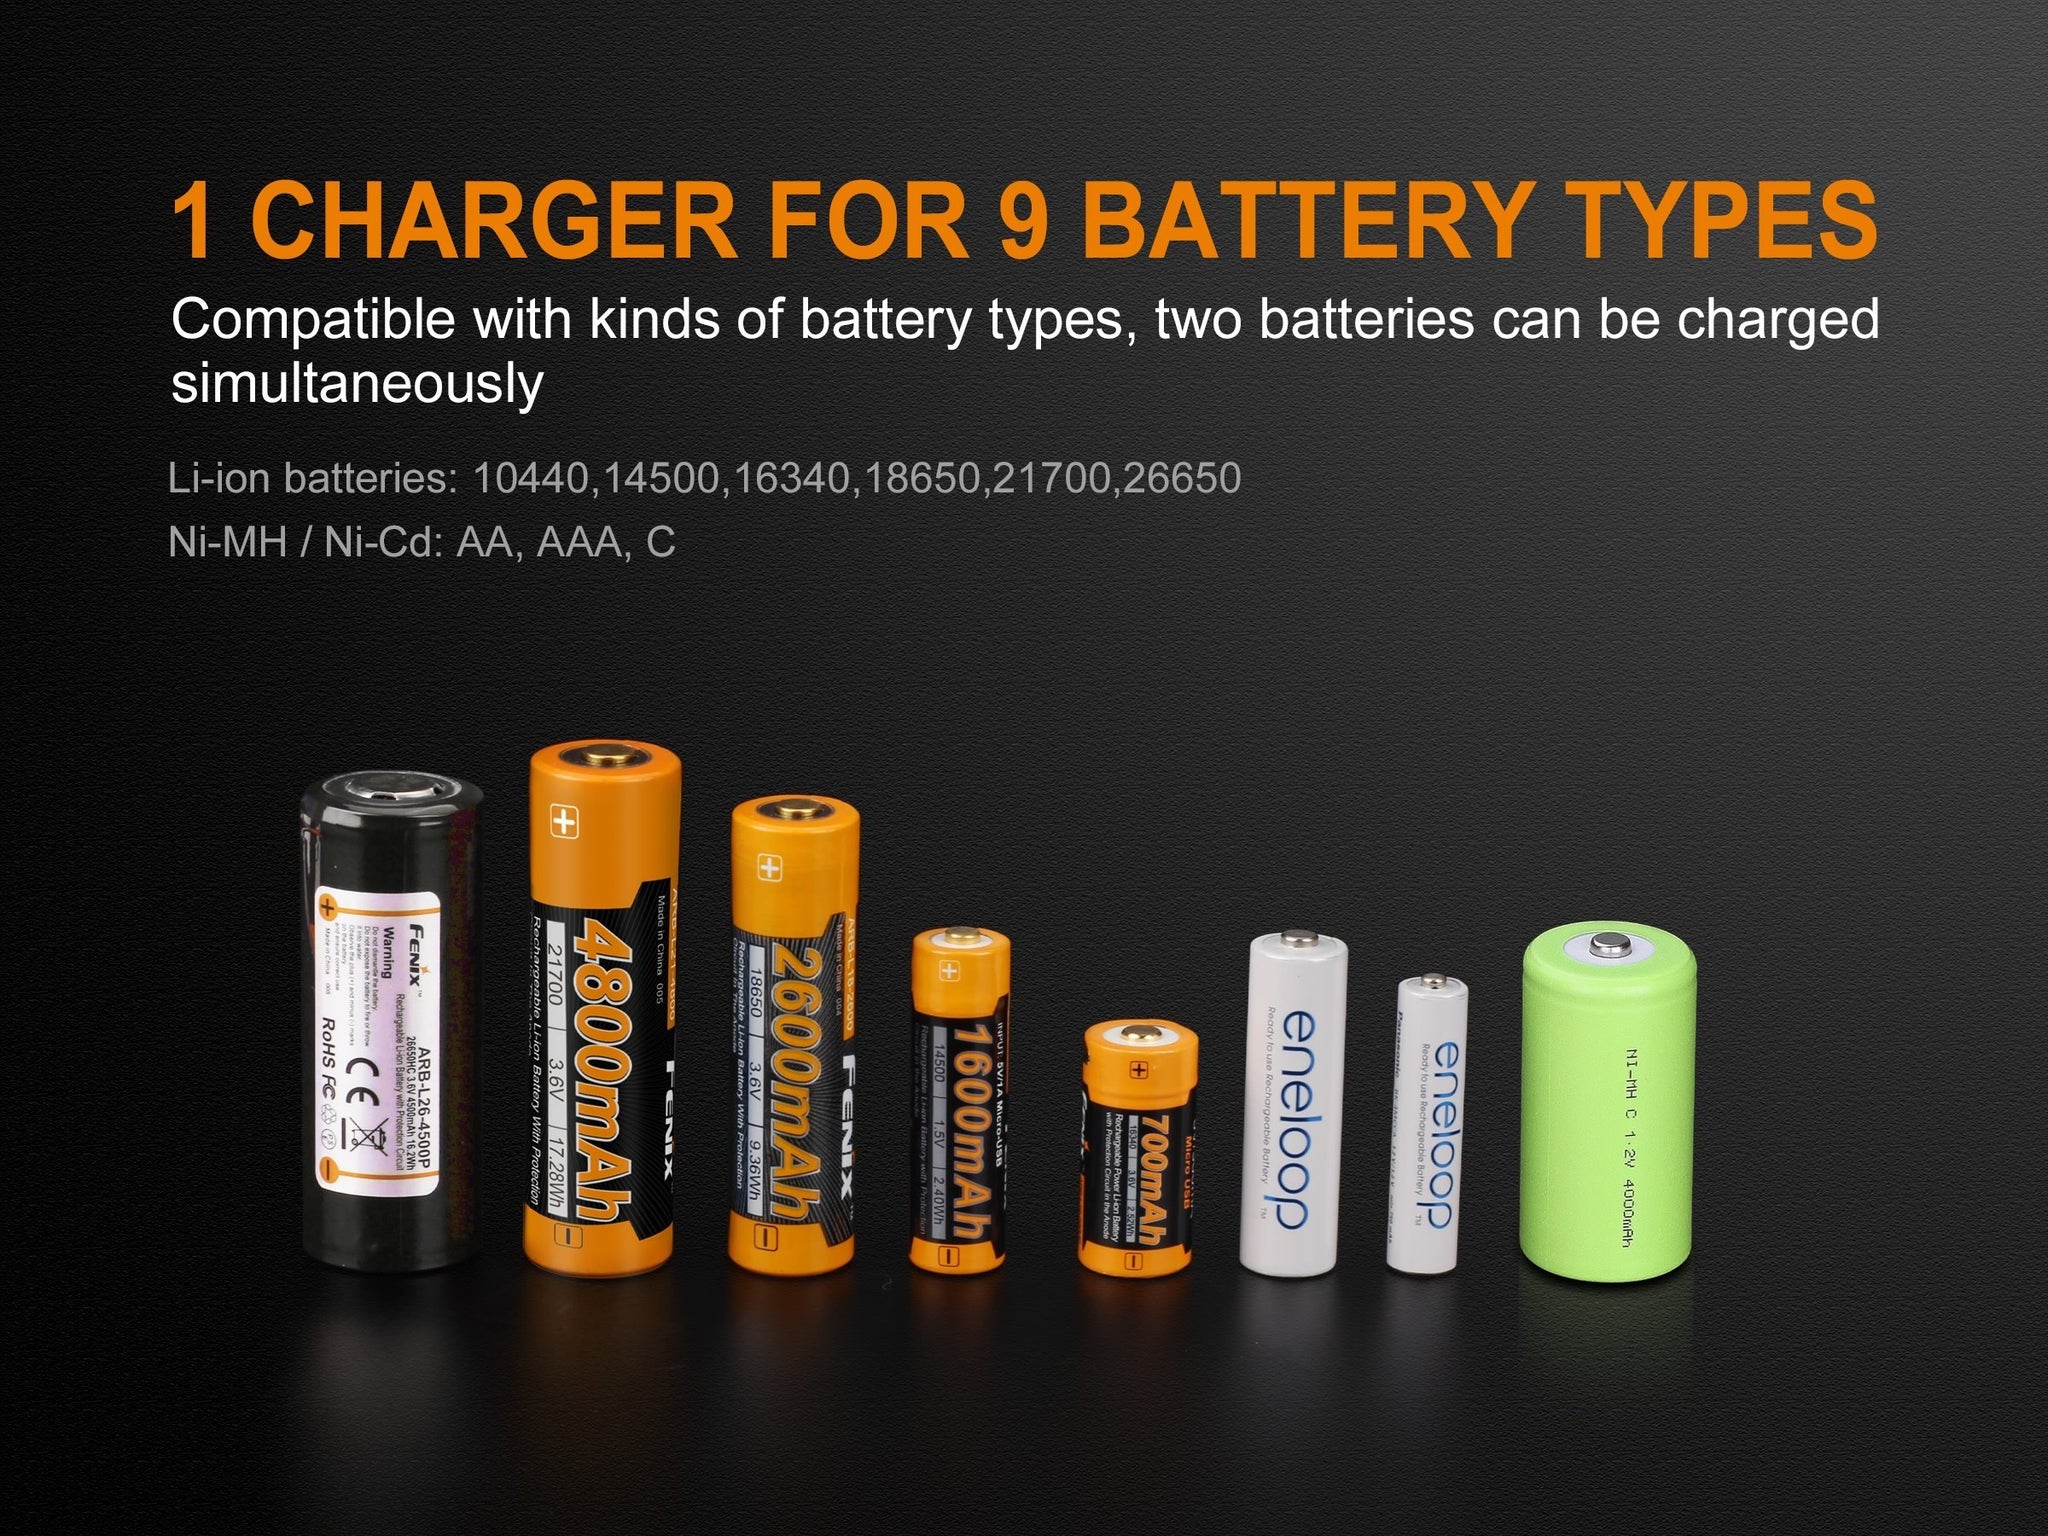 Batteries compatible with the charger